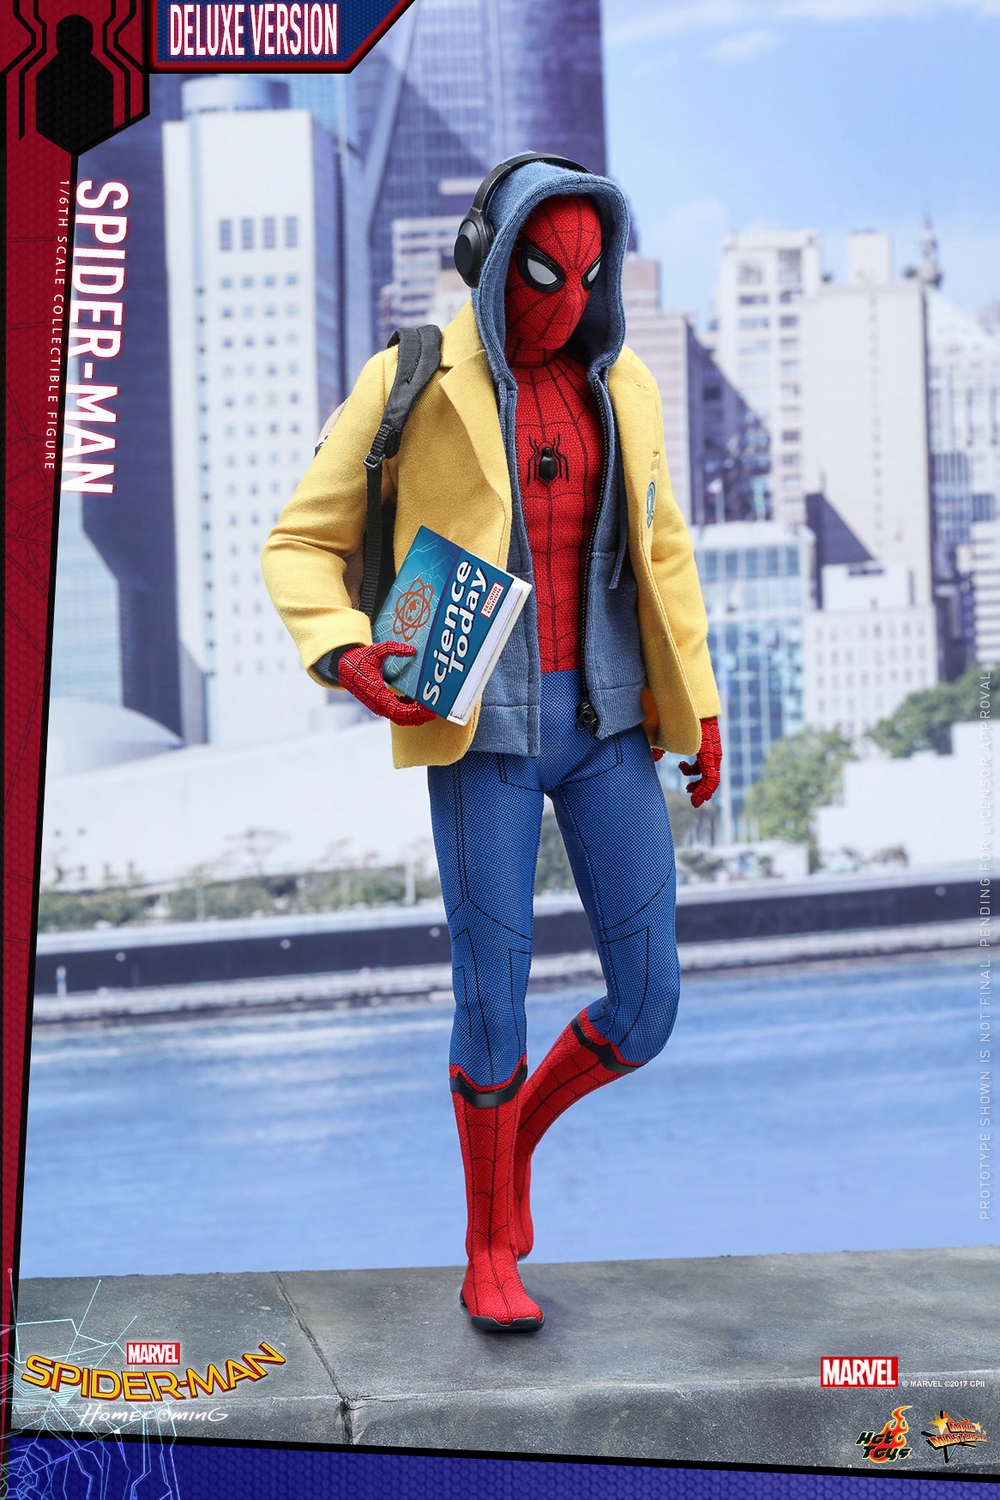 Hot-Toys-MMS426-Spider-Man-Homecoming-Deluxe-003.jpg